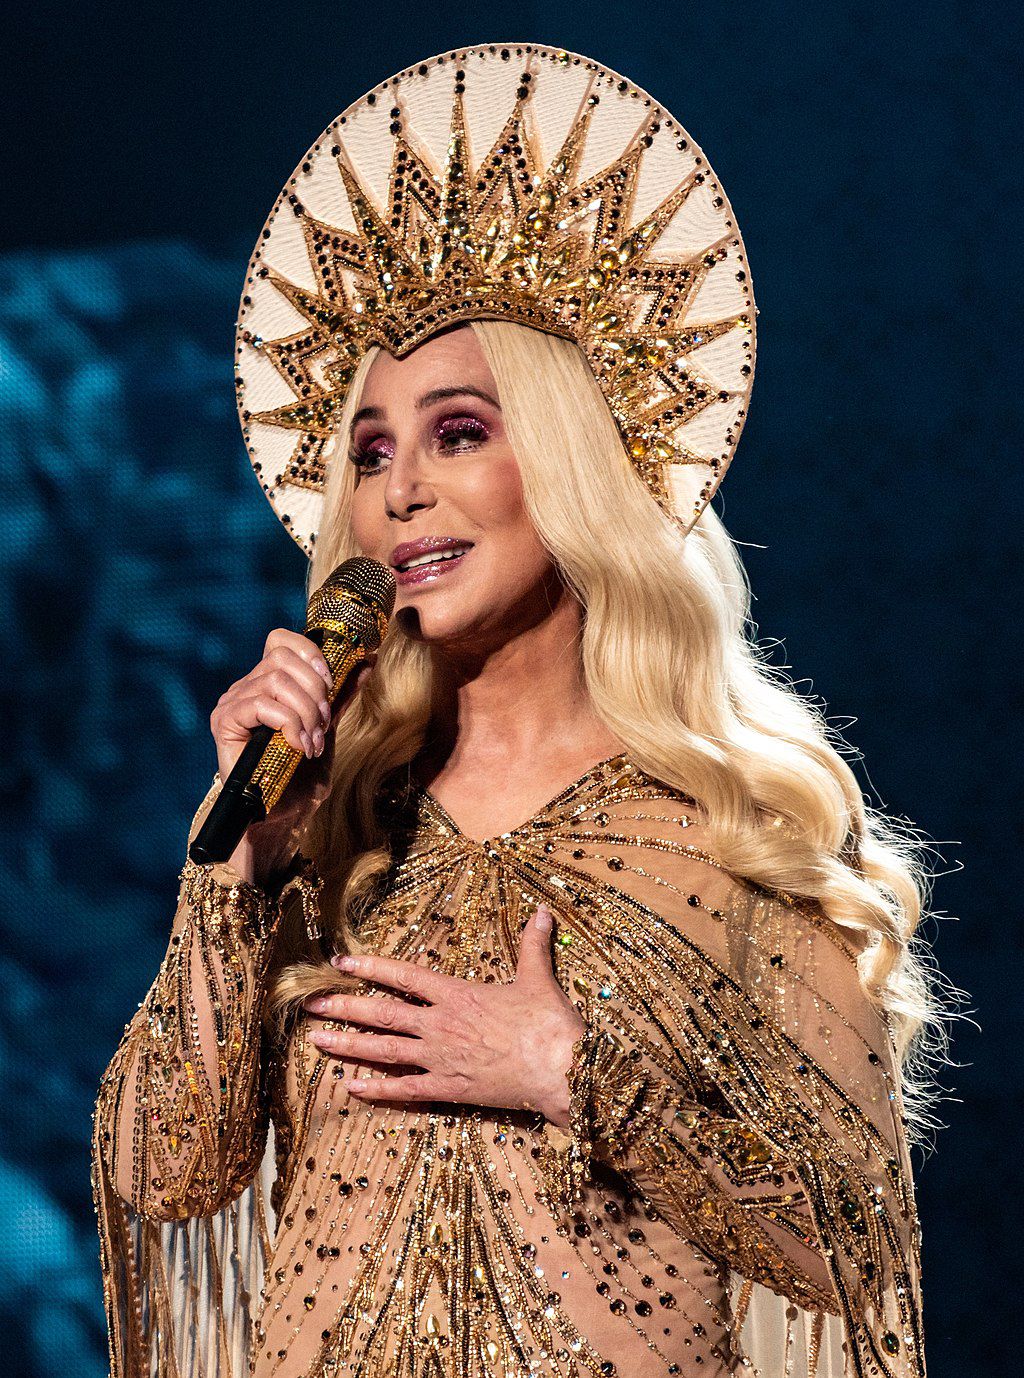 <p>Cher came back to touring in 2018, with the "Here We Go Again Tour," which was the biggest tour of her career, <a href="https://www.billboard.com/pro/cher-personal-record-tour-2019/">breaking her personal record</a> in touring gross.</p>